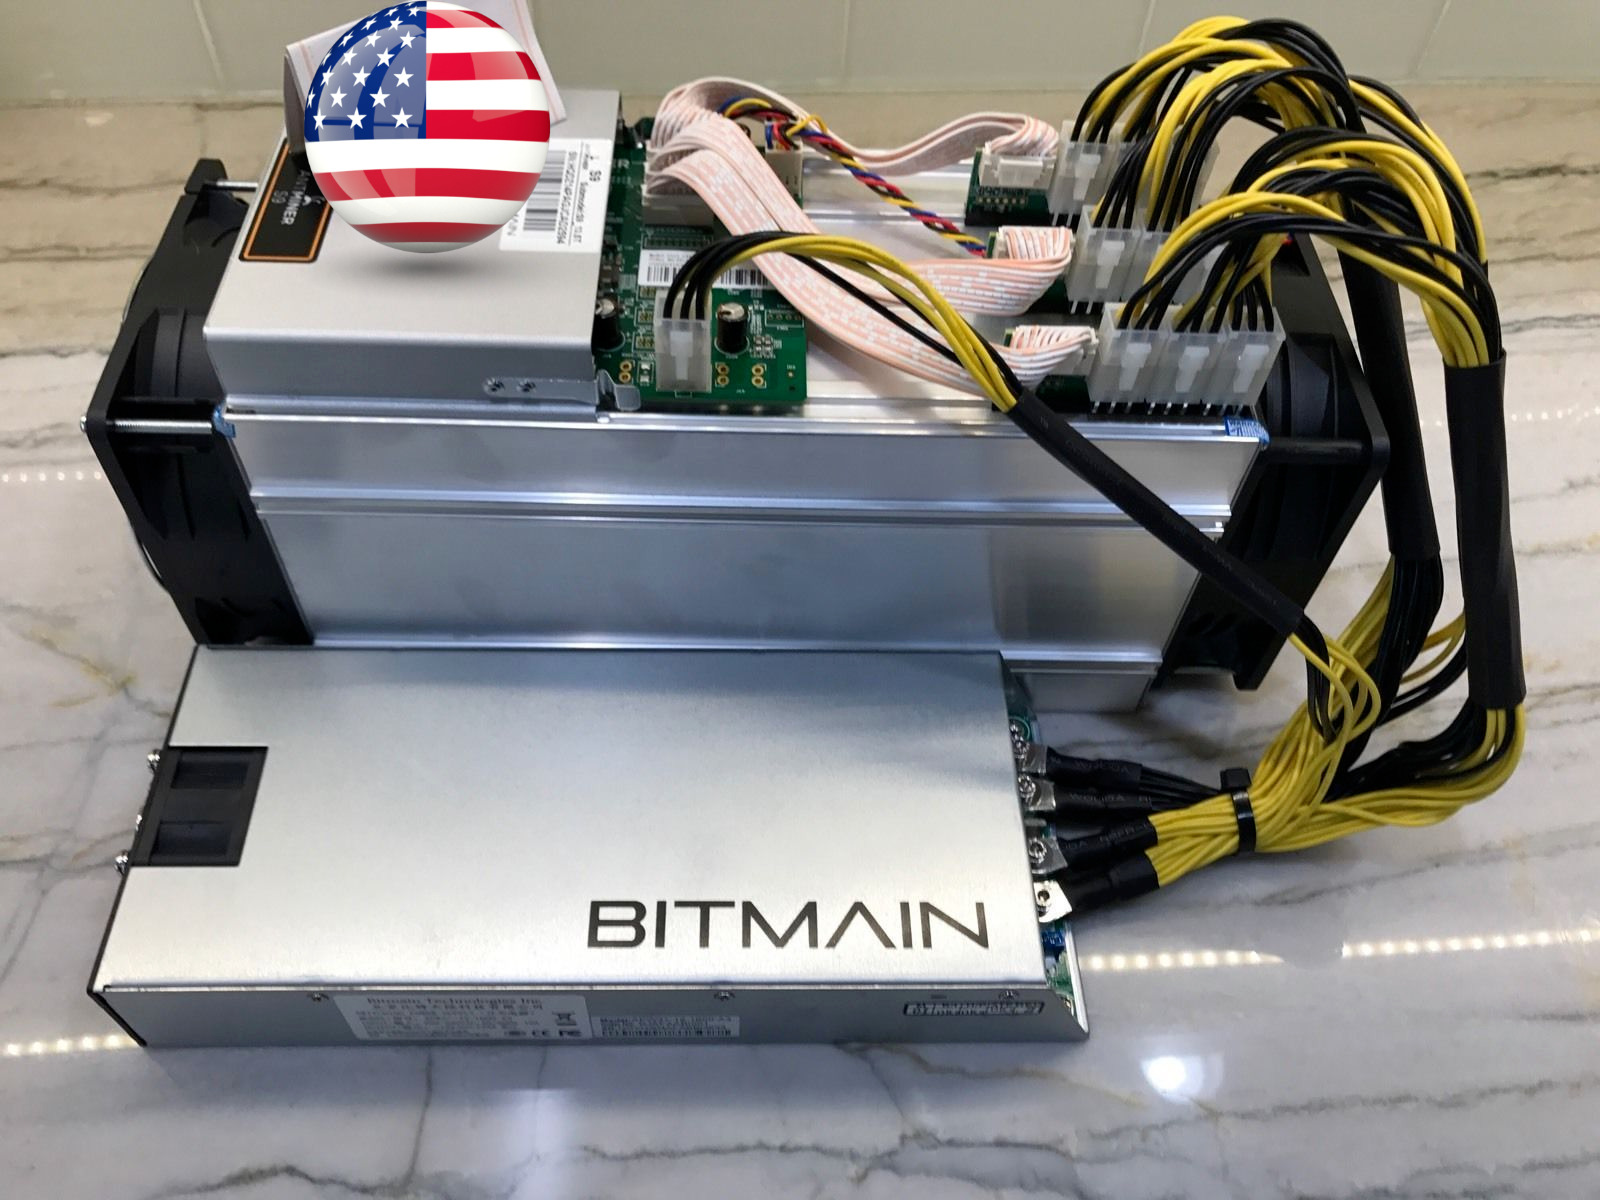 Bitmain S9 13.5TH/s ANT ASIC MINER  + PSU Good Working Condition IN BOX, USA